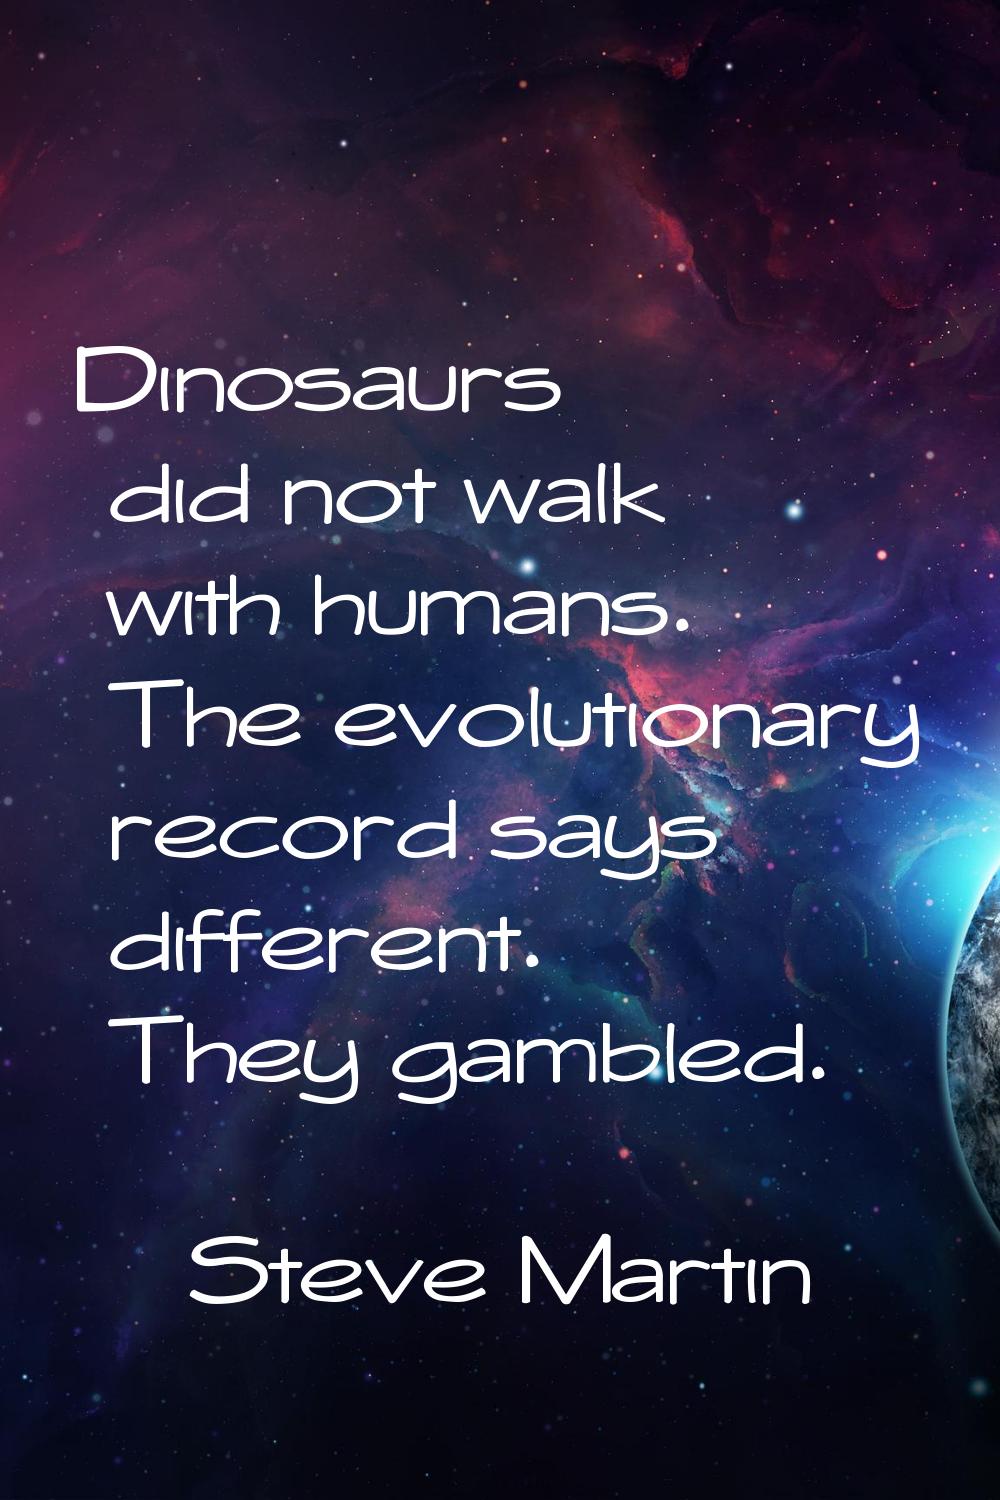 Dinosaurs did not walk with humans. The evolutionary record says different. They gambled.